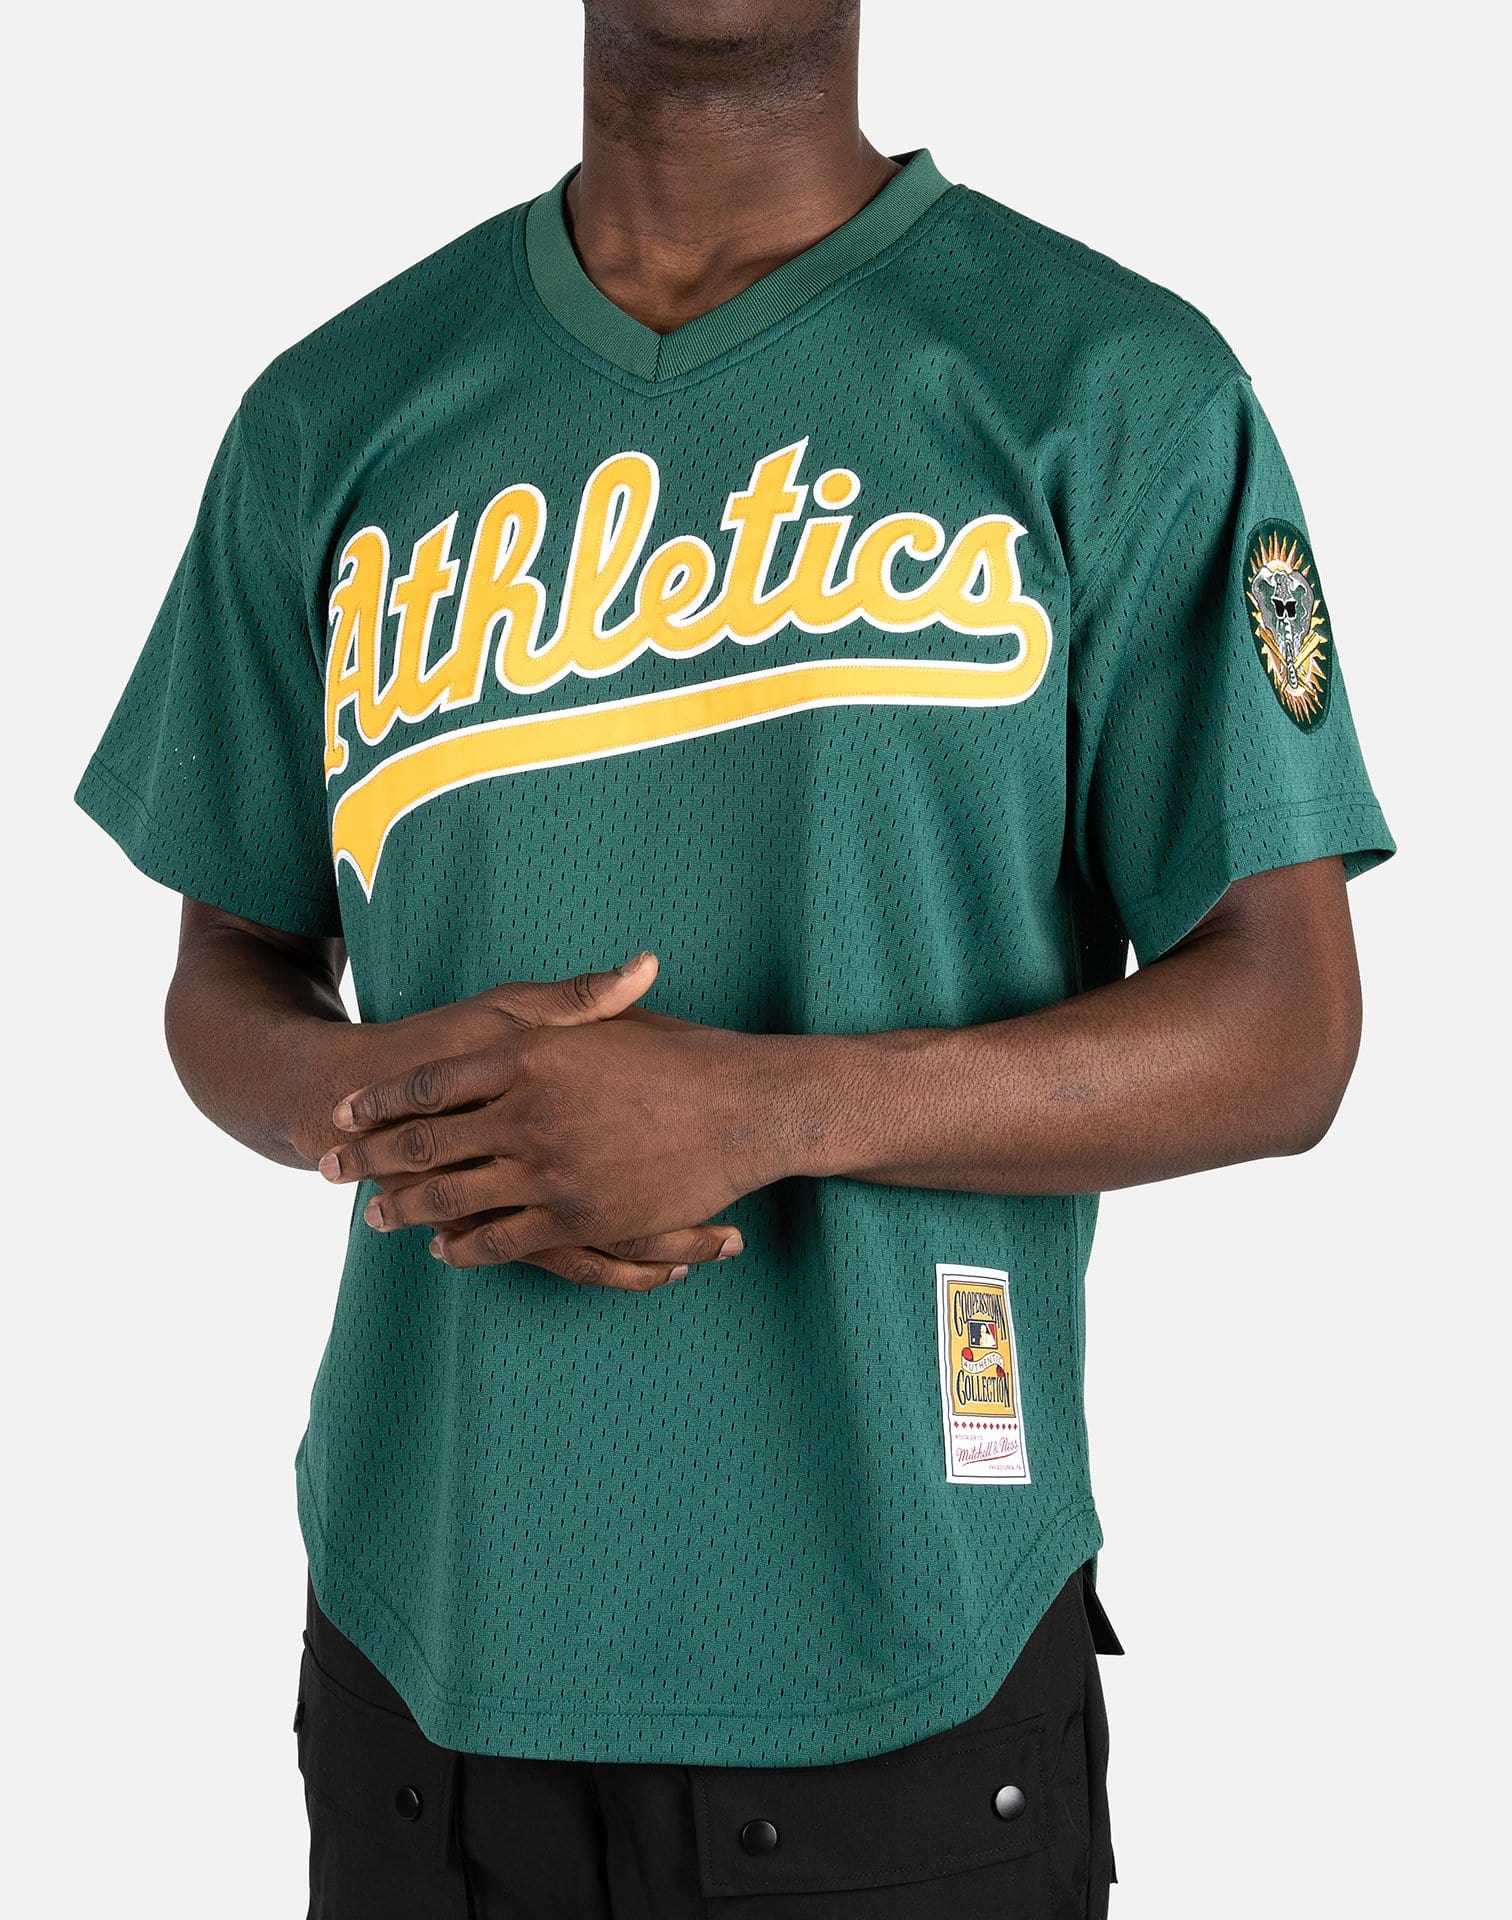 Rickey Henderson Team Issued Russell Athletic Jersey - Size 42